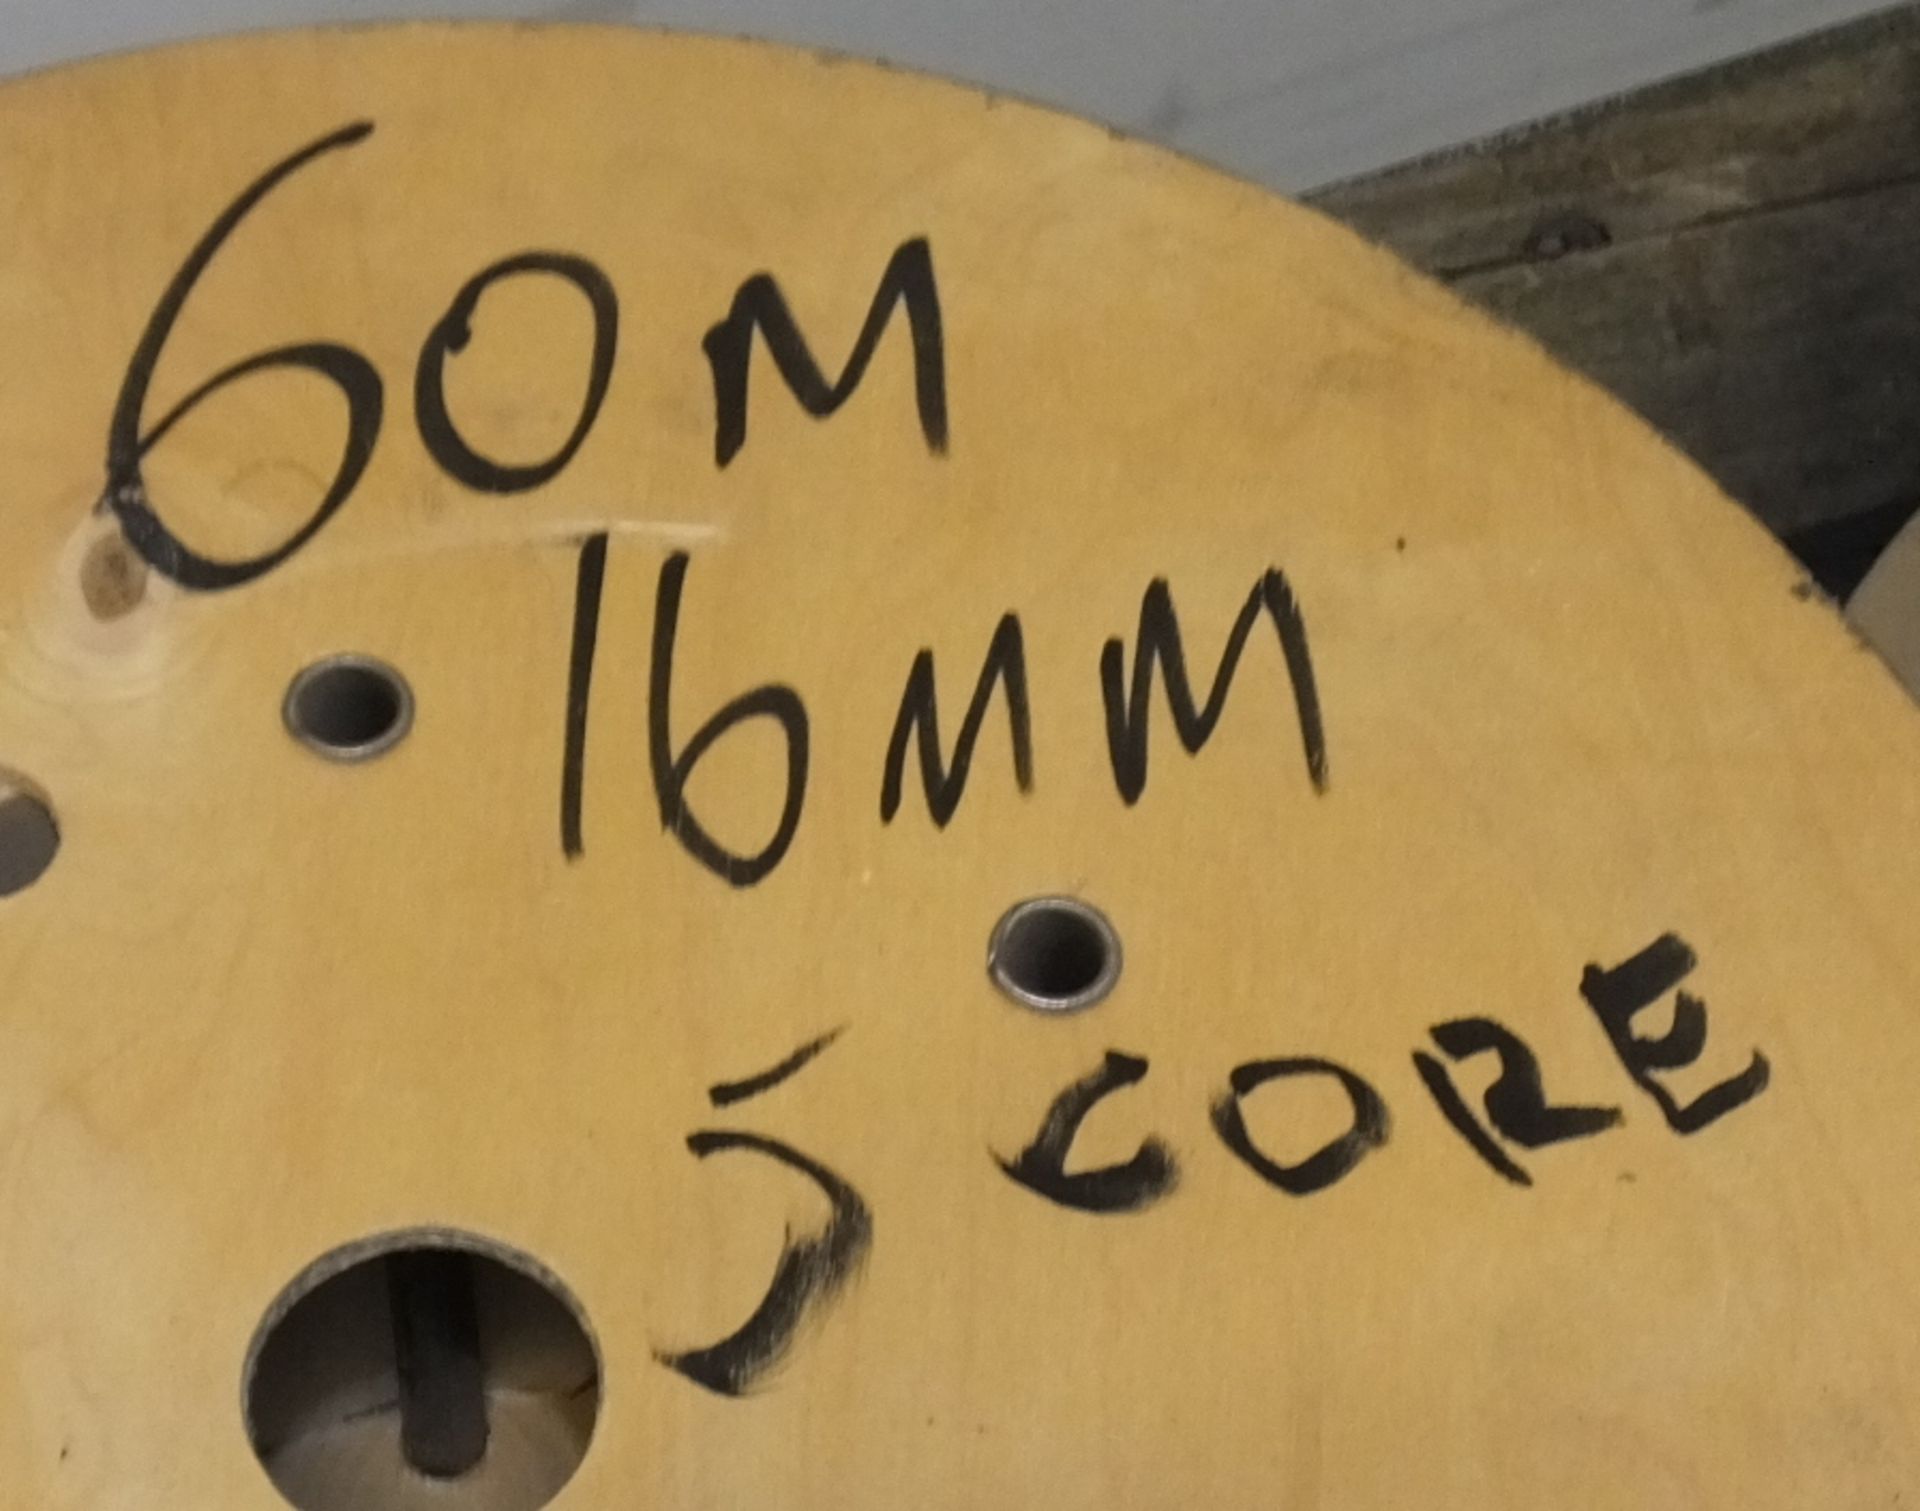 Reel of cable - 60M - 16mm - 5 core - Image 3 of 3